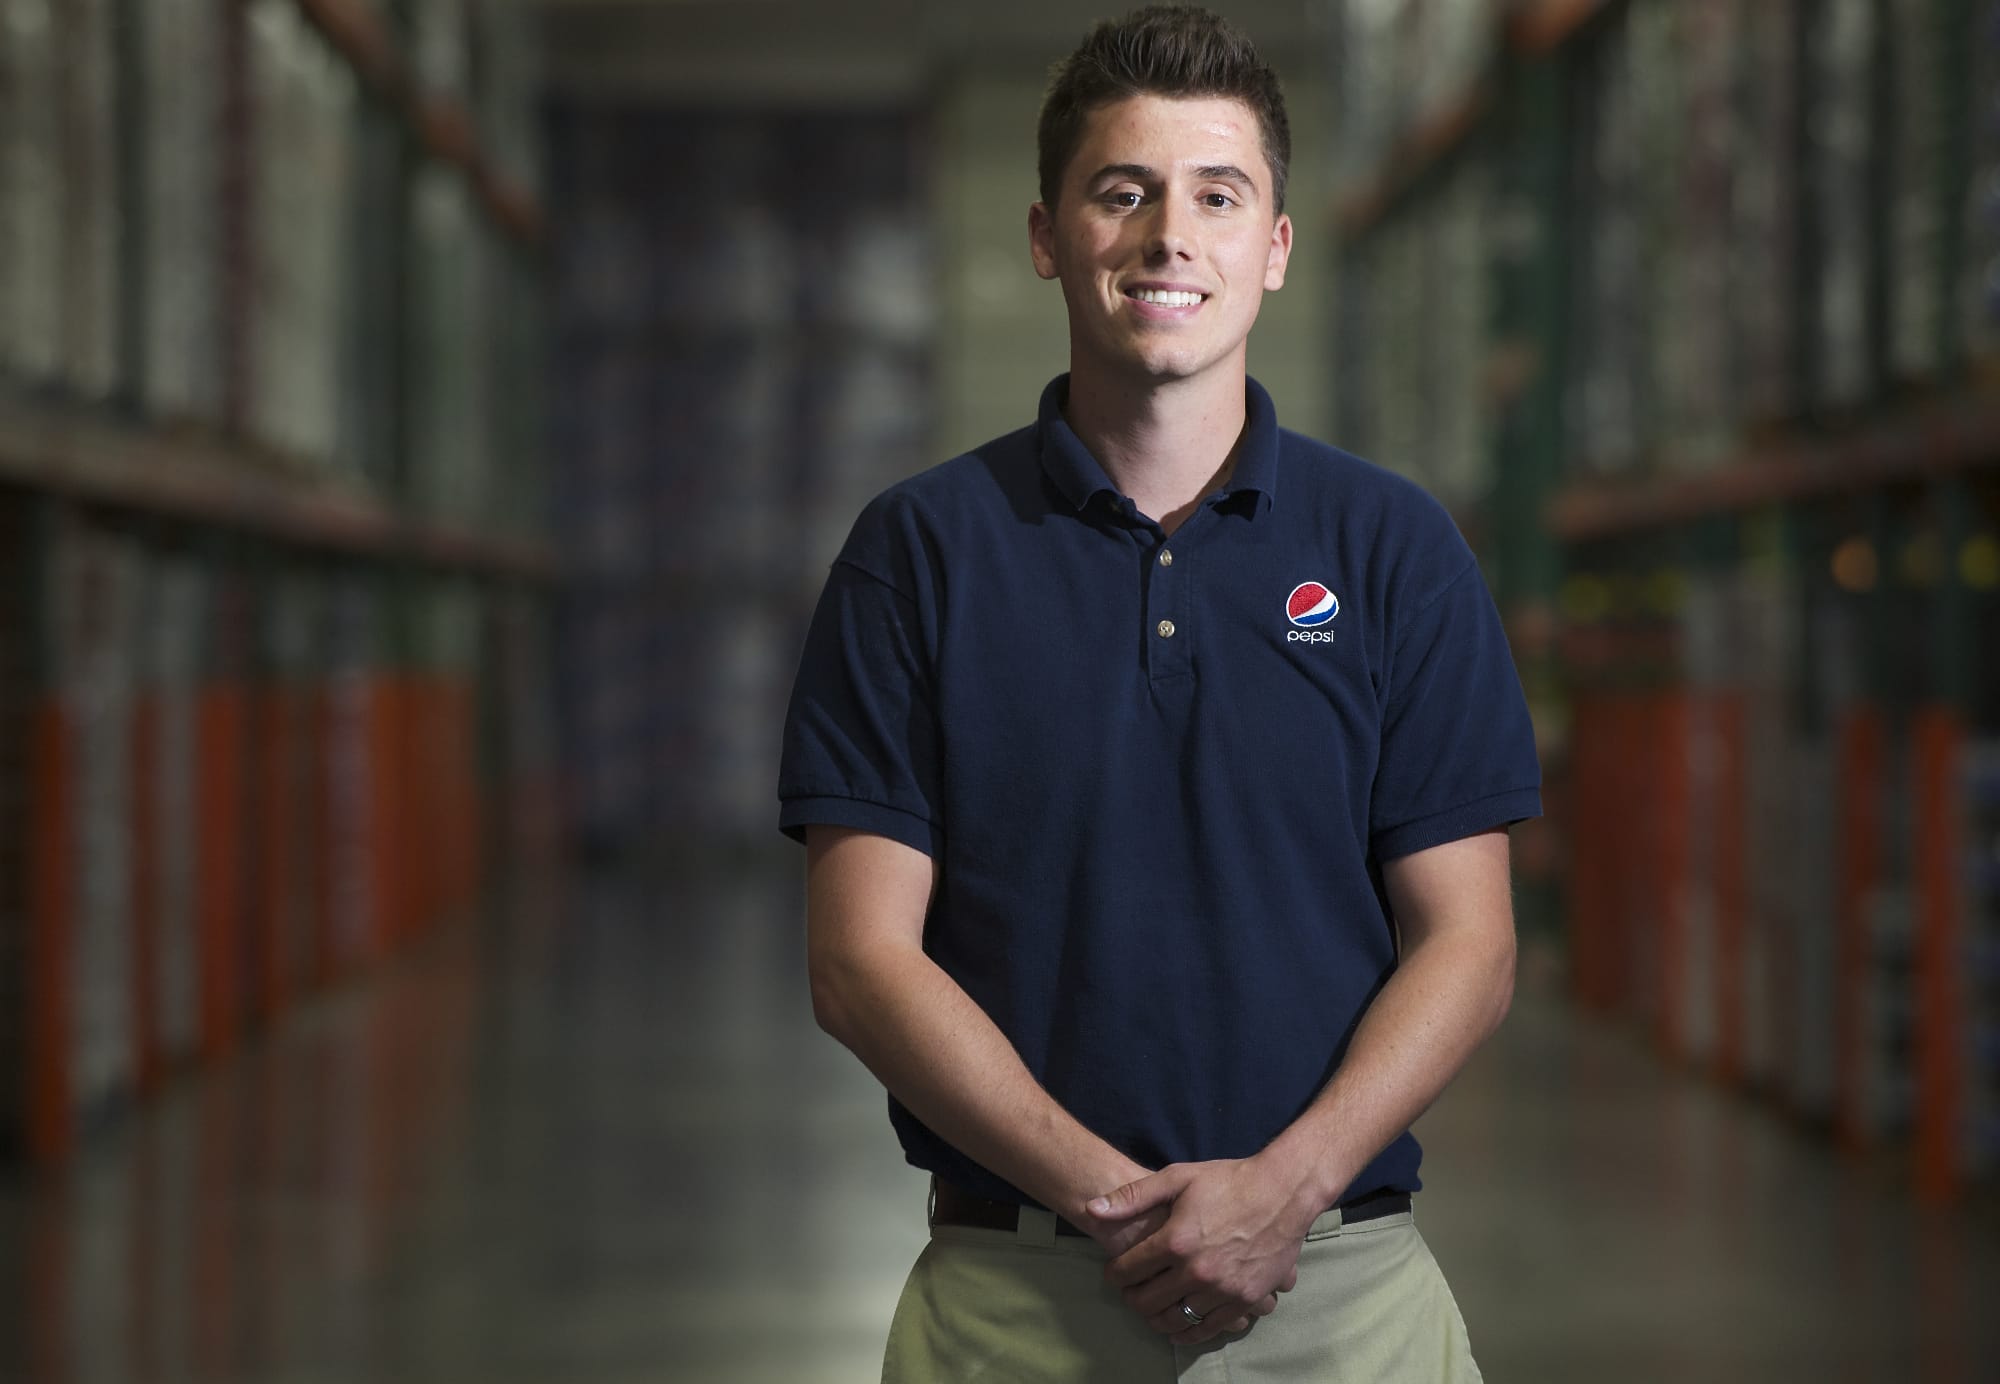 Dustin Meyer, sales representative for Corwin Beverage Company, has been with the company two years.